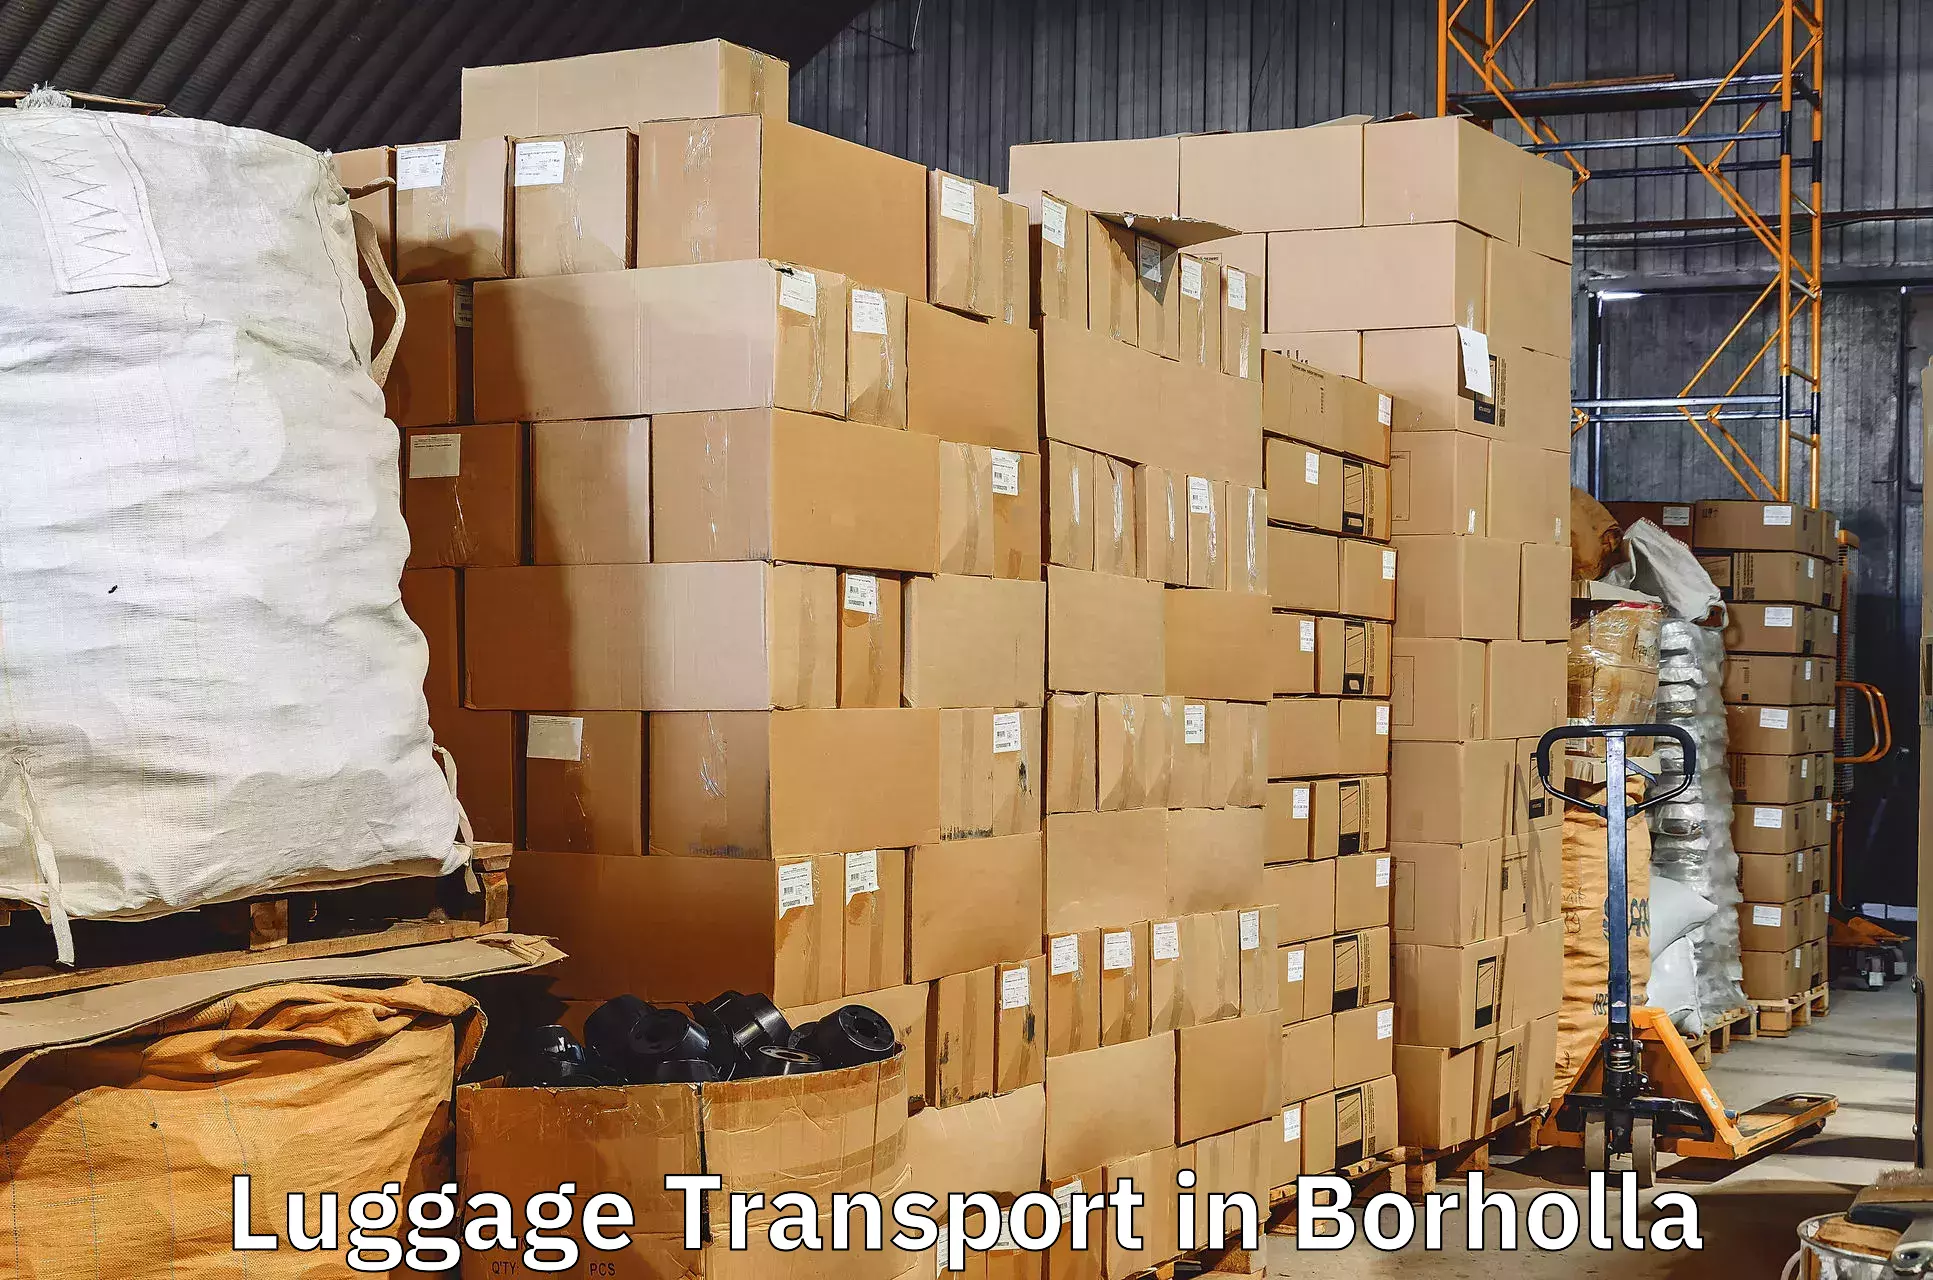 Doorstep luggage collection in Borholla